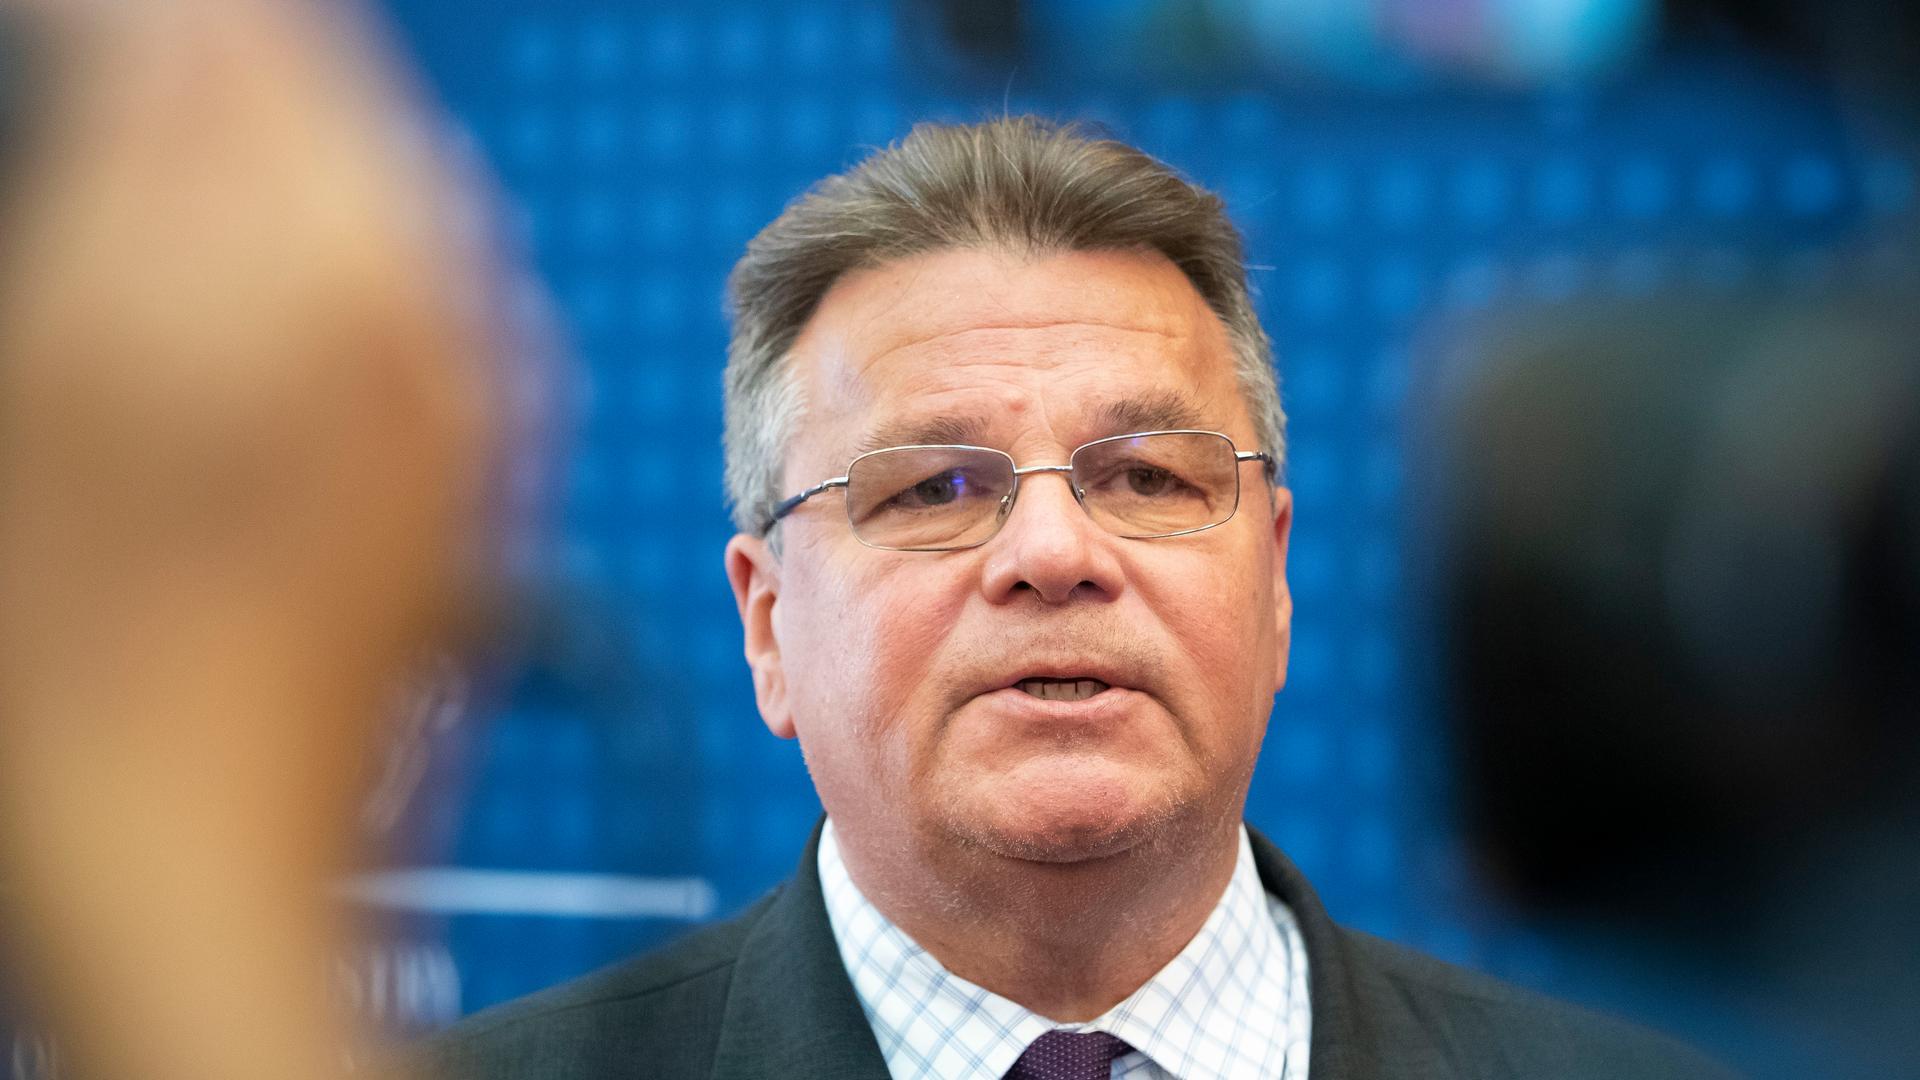 A close-up photo of Lithuania's Minister of Foreign Affairs Linas Linkevicius as he answers questions during a meeting with the press in the Ministry of Foreign Affairs in Vilnius, Lithuania, Aug. 11, 2020.